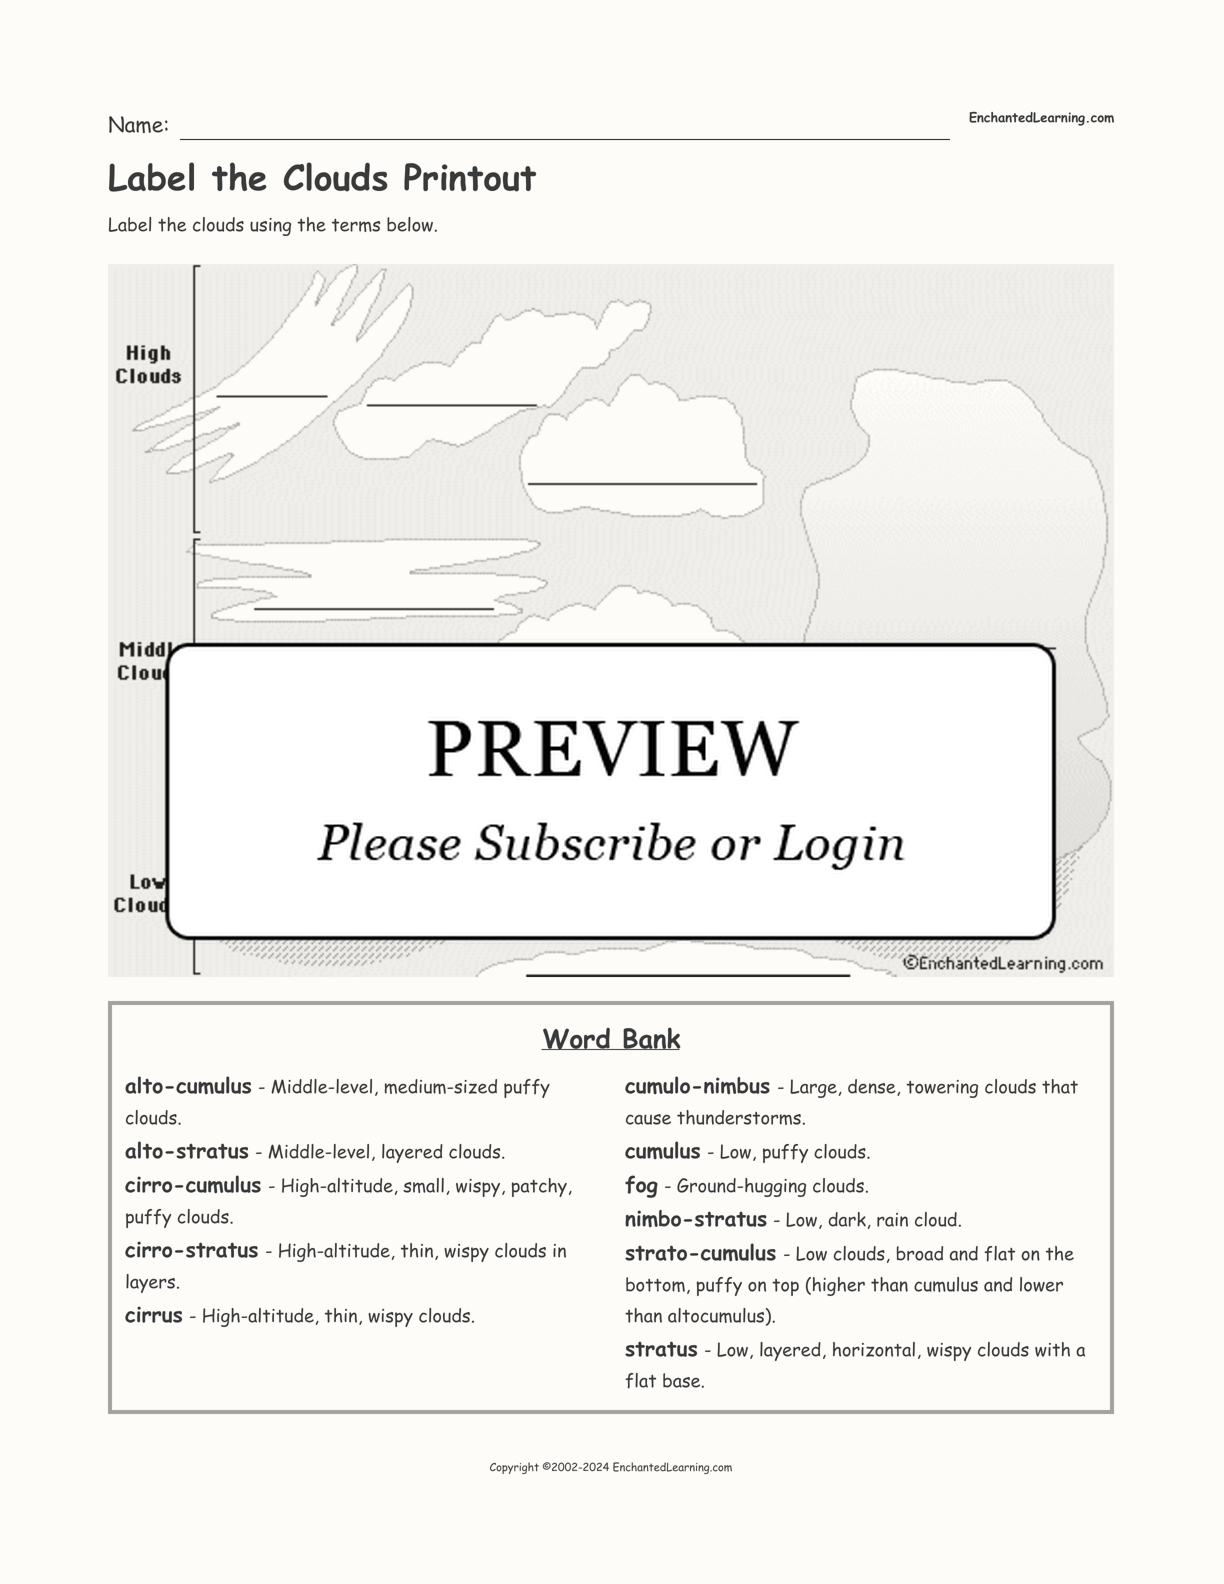 Label the Clouds Printout interactive worksheet page 1